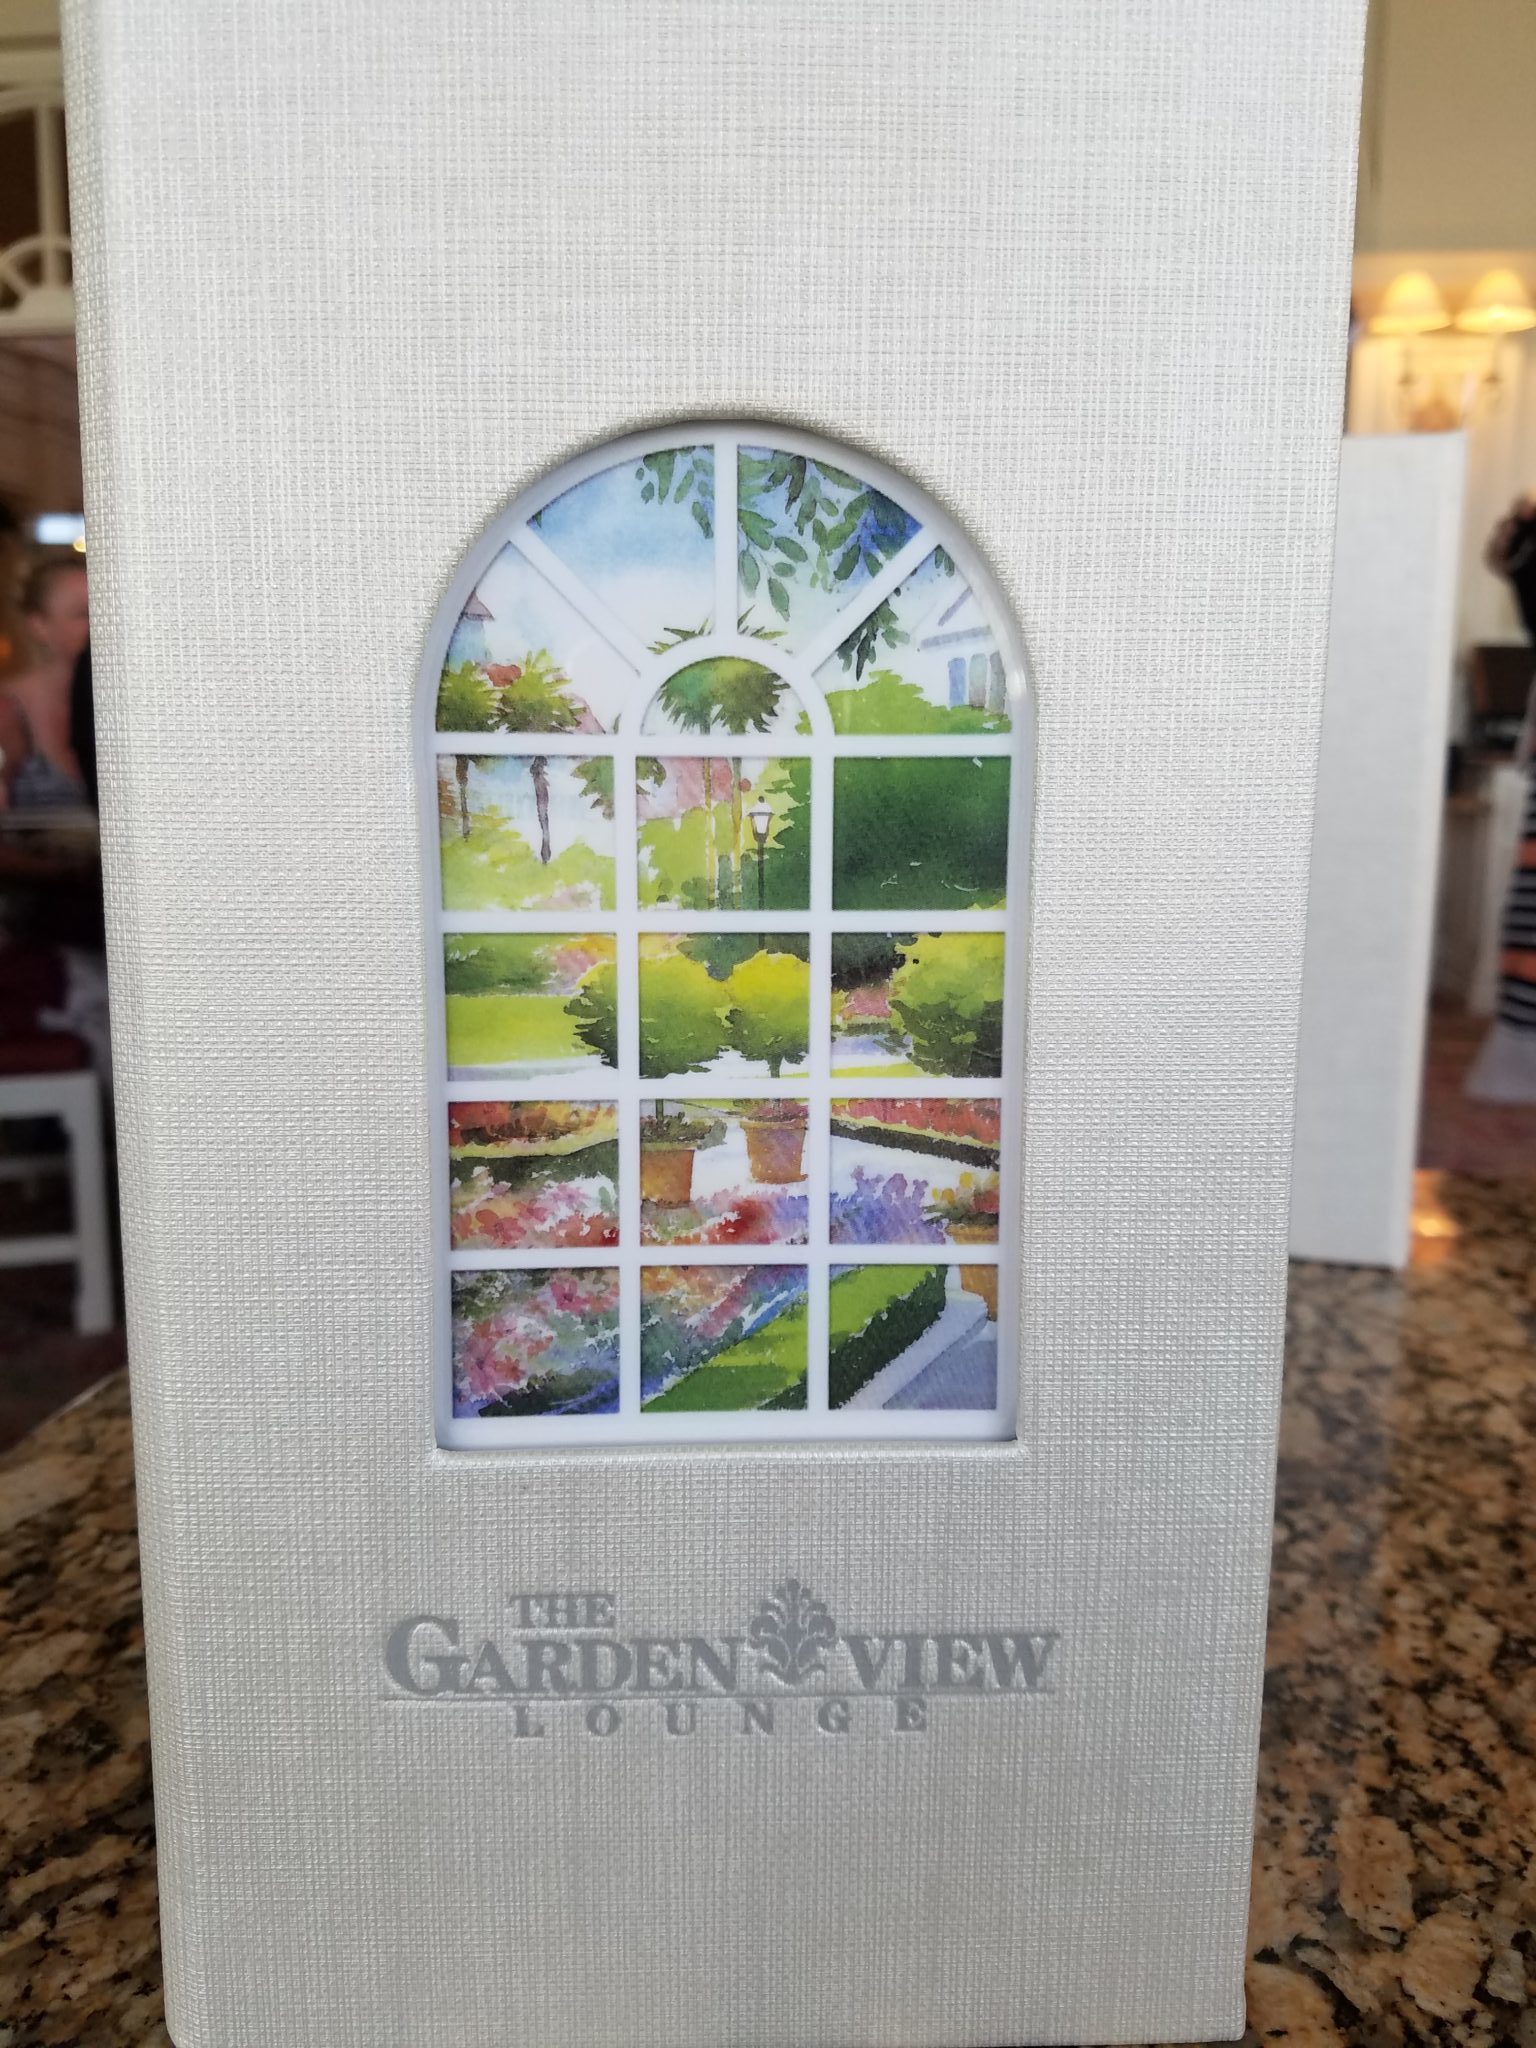 The Grand Floridian’s Garden View Lounge Afternoon Tea Review